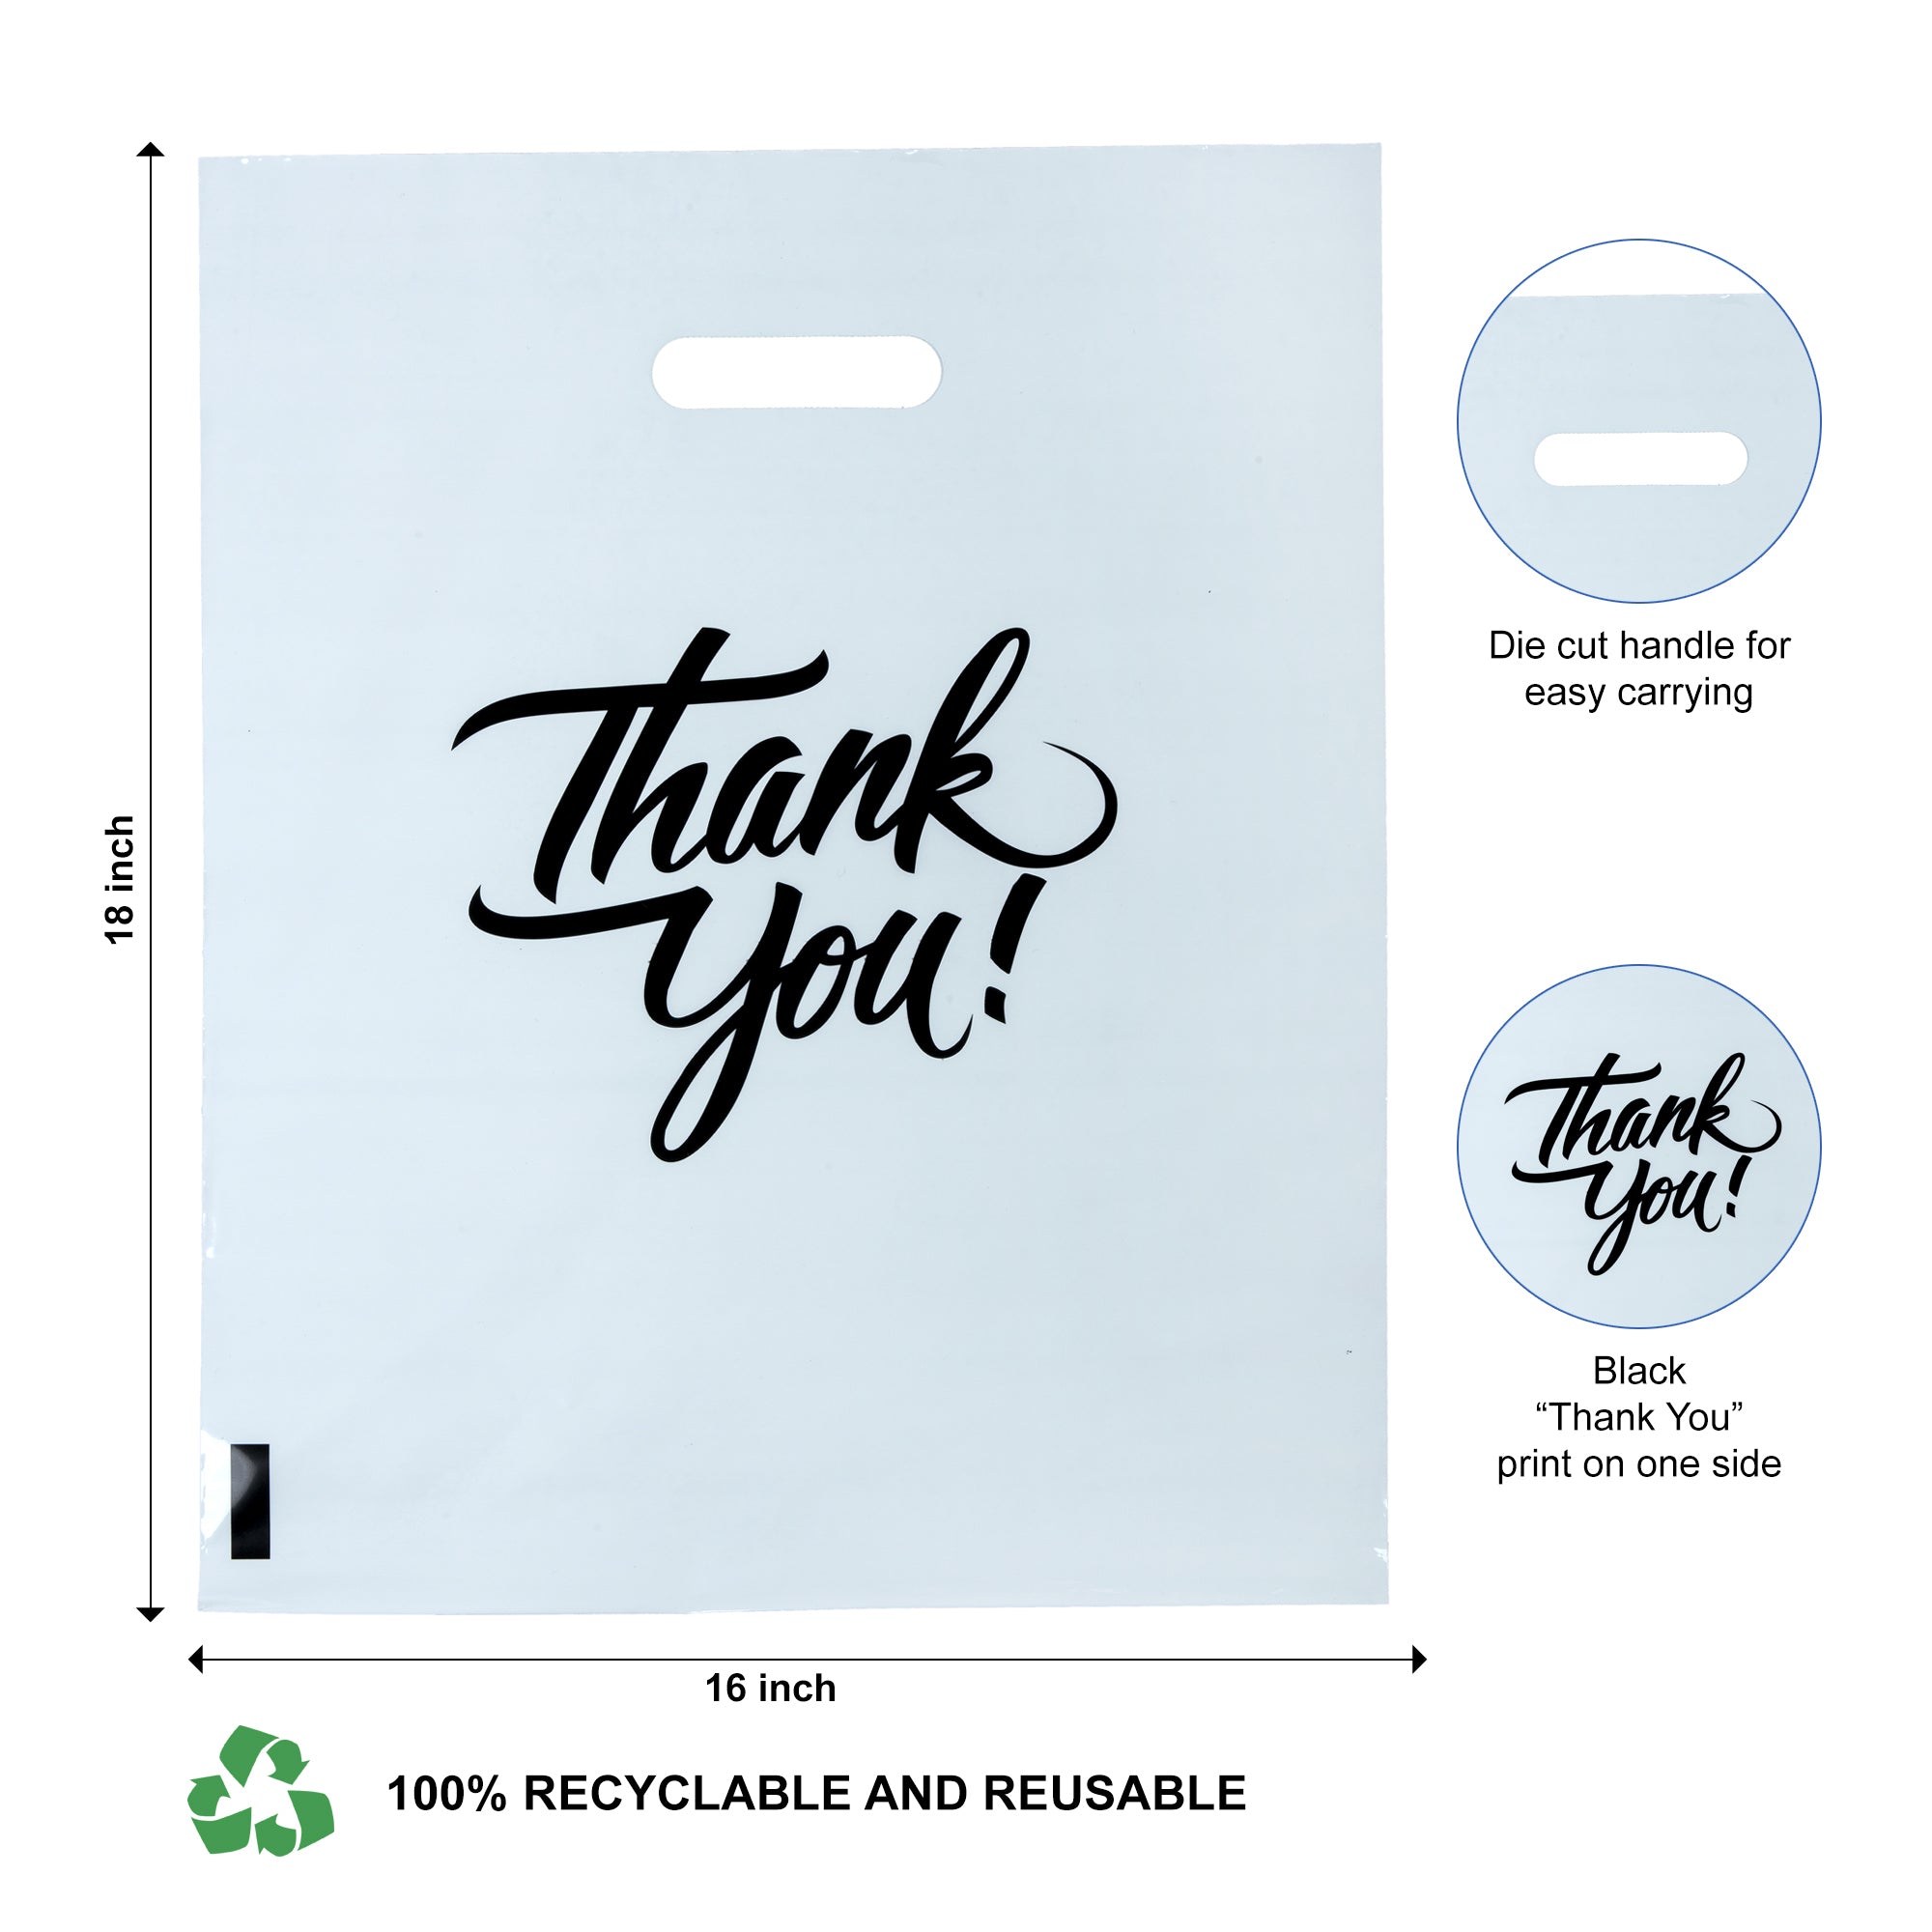 ZORRITA 100 Pack Thank You Bags for Business, 9 x 12 Inch Plastic  Merchandise Bags Extra Thick Retai…See more ZORRITA 100 Pack Thank You Bags  for